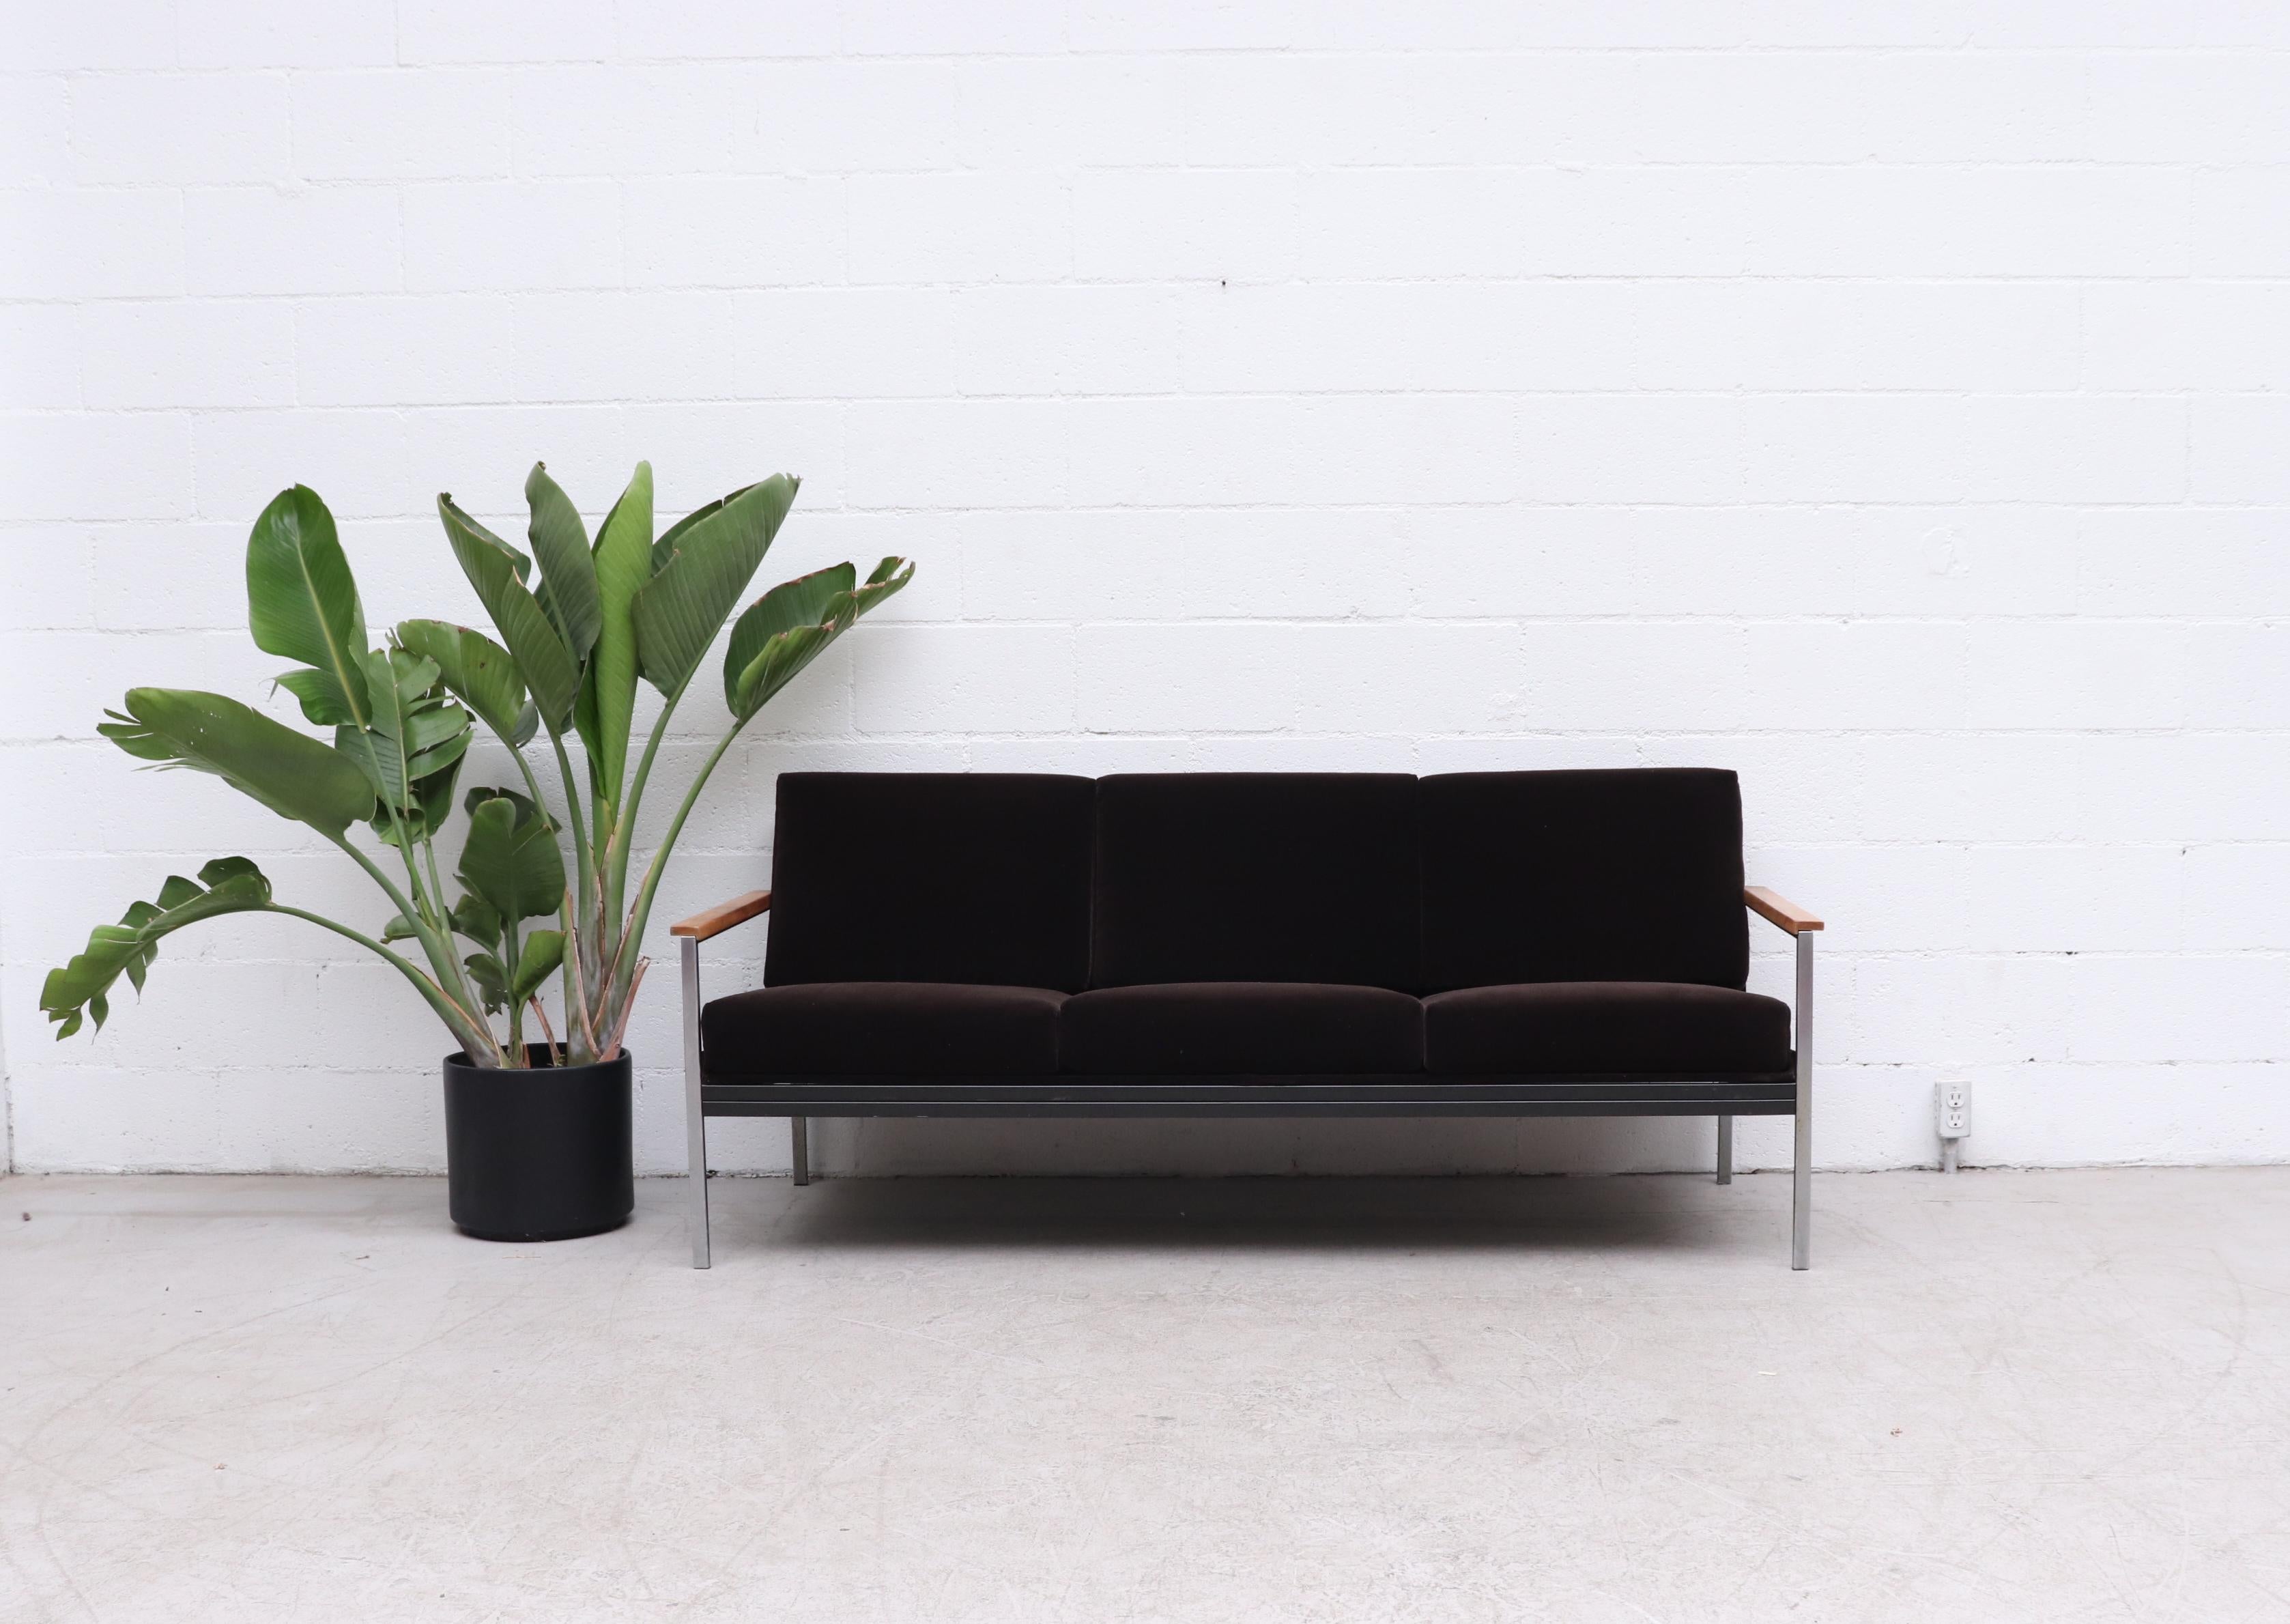 Beautiful, mid-century, 3-seat sofa with mocha velvet upholstery, steel frame and lightly refinished natural wood armrests. Designed by Coen de Vries. As a leading member of the Goed Wonen foundation, De Vries was of great significance for the